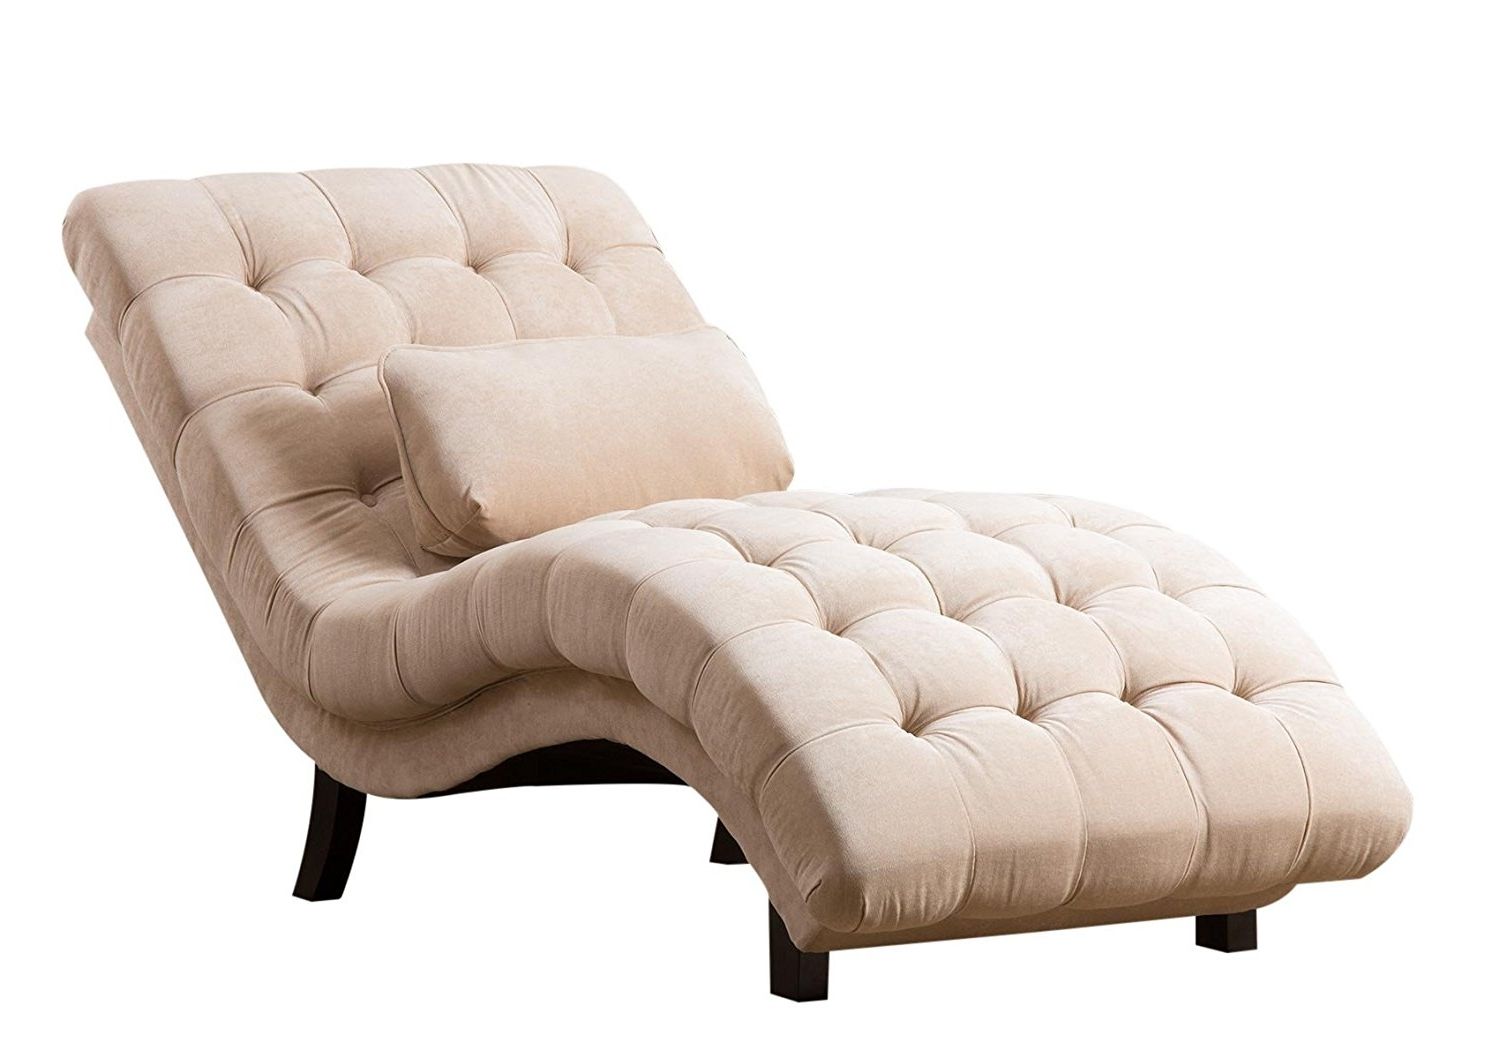 Well Known Chaise Chairs With Regard To Amazon: Abbyson Carmen Cream Fabric Chaise: Home & Kitchen (View 11 of 15)